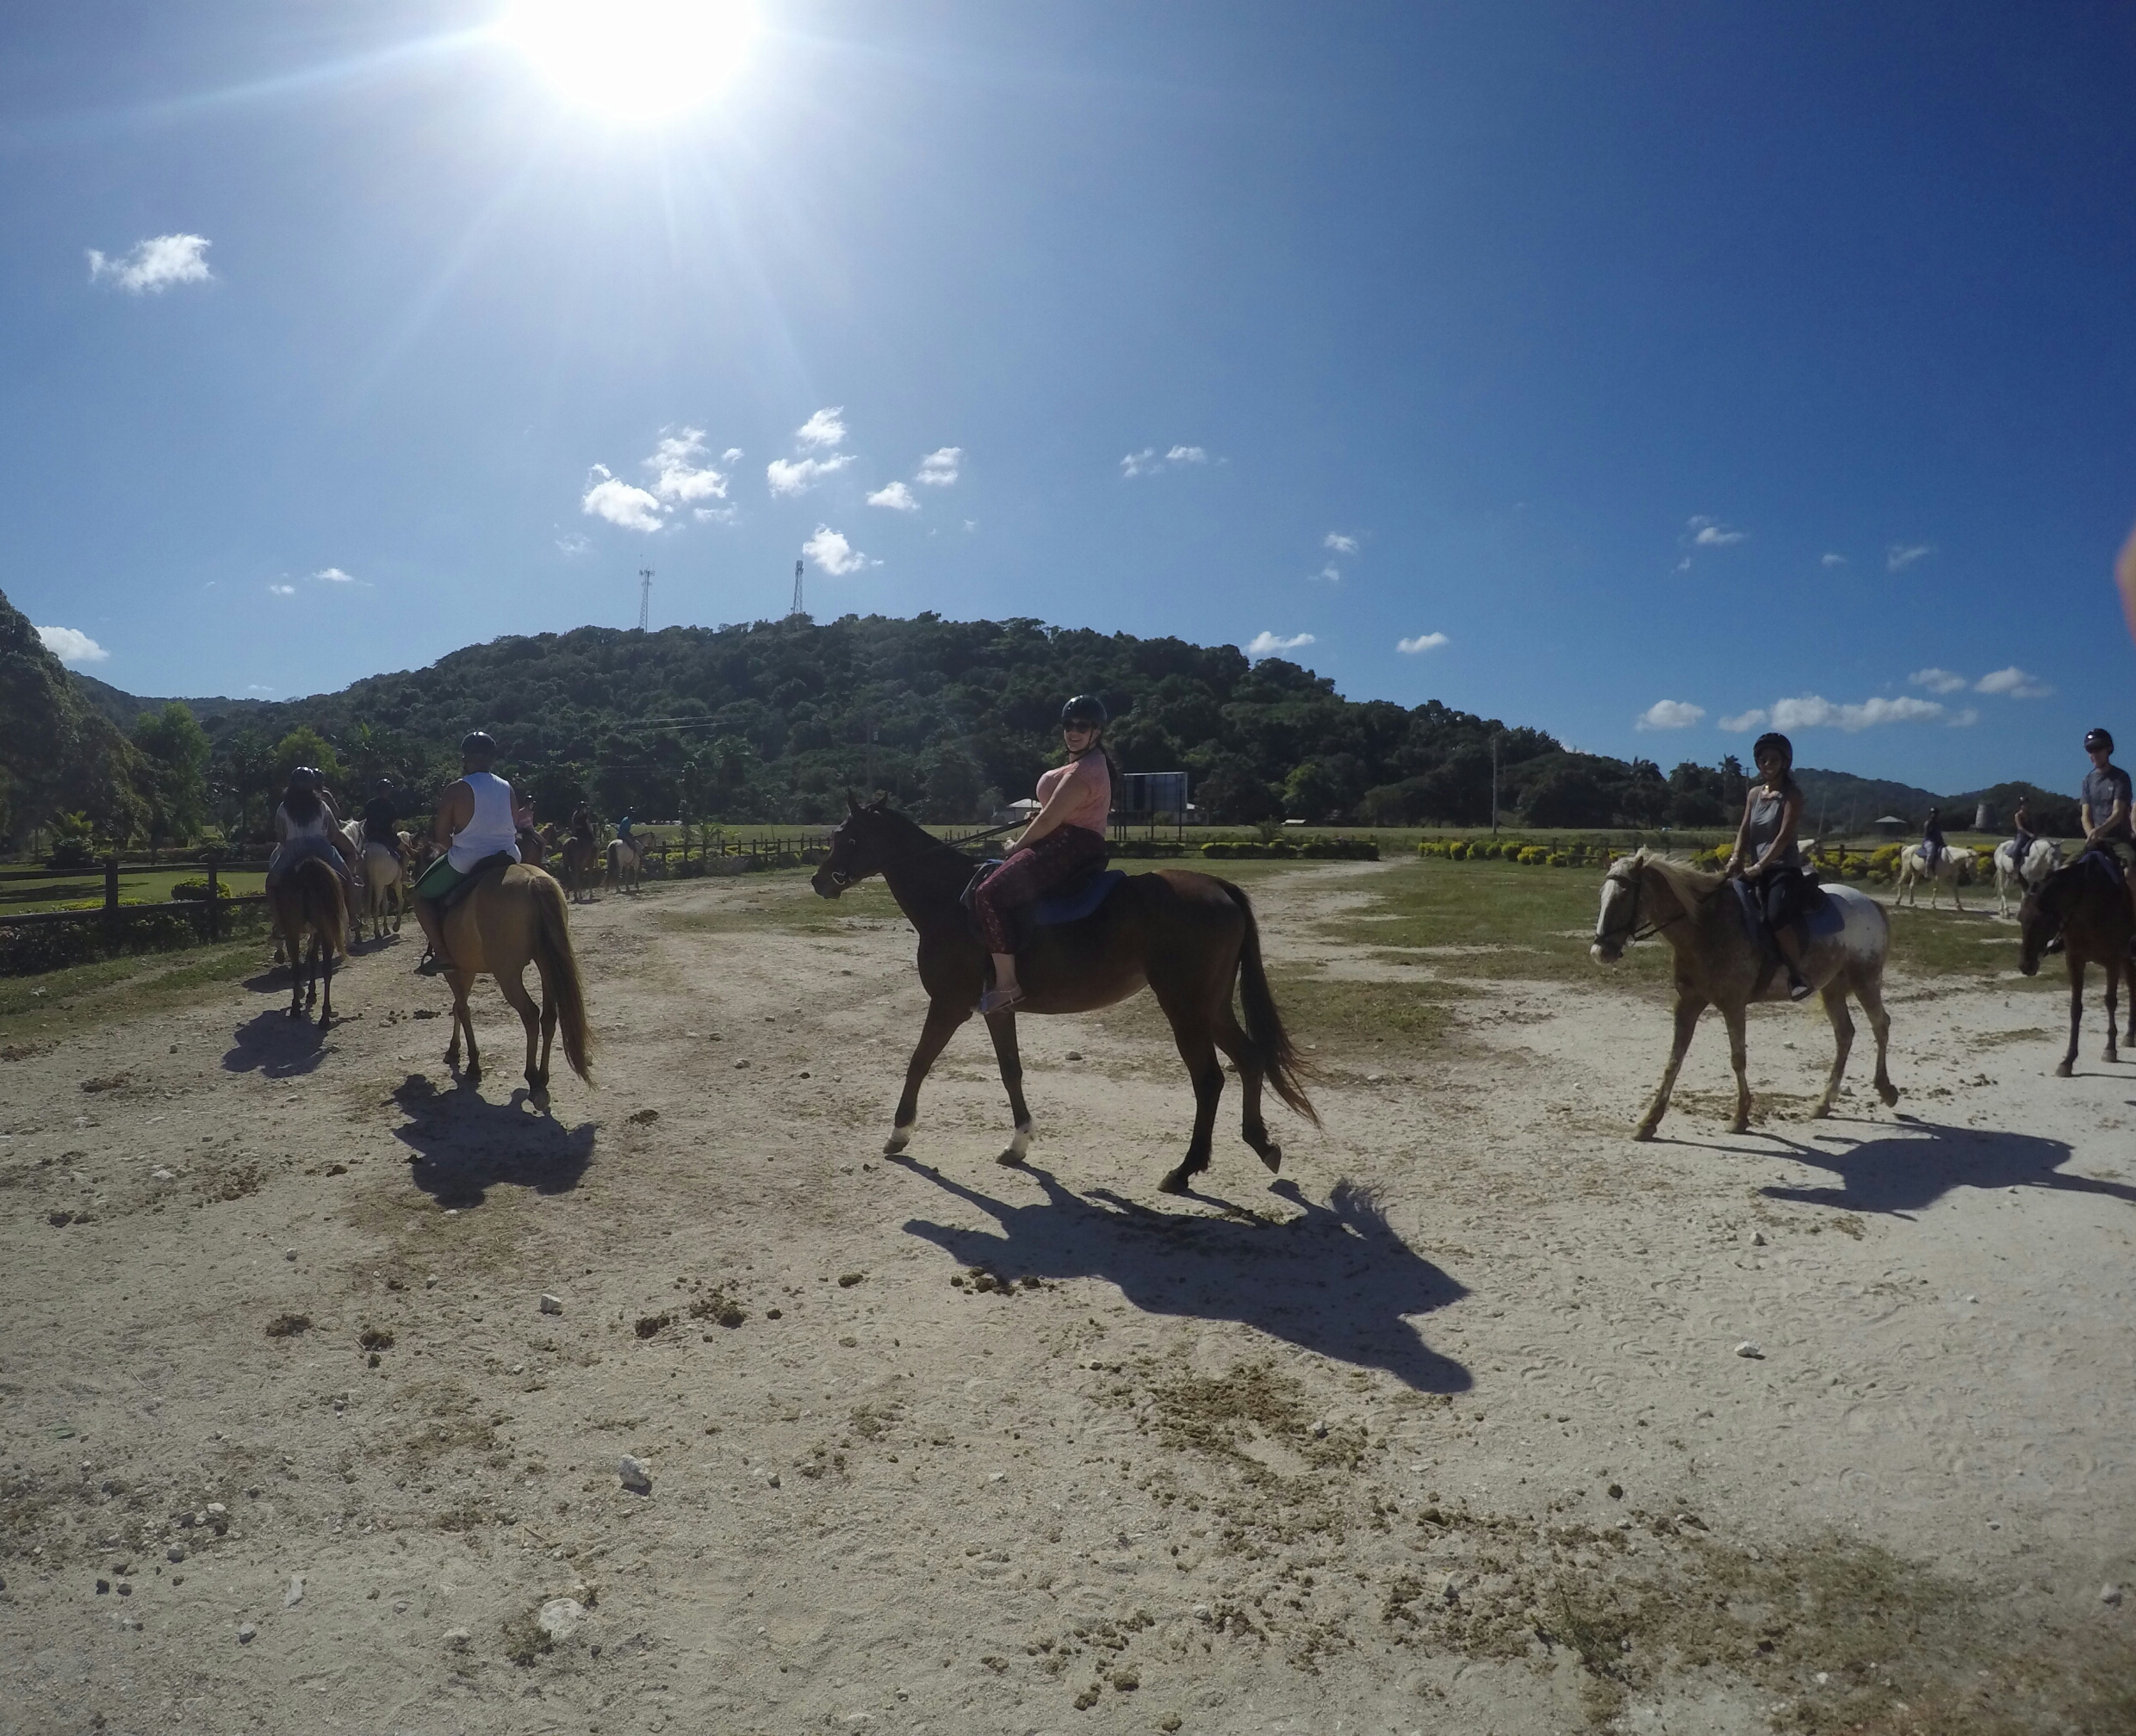  jamaica on horse back ride tour with chukka adventures